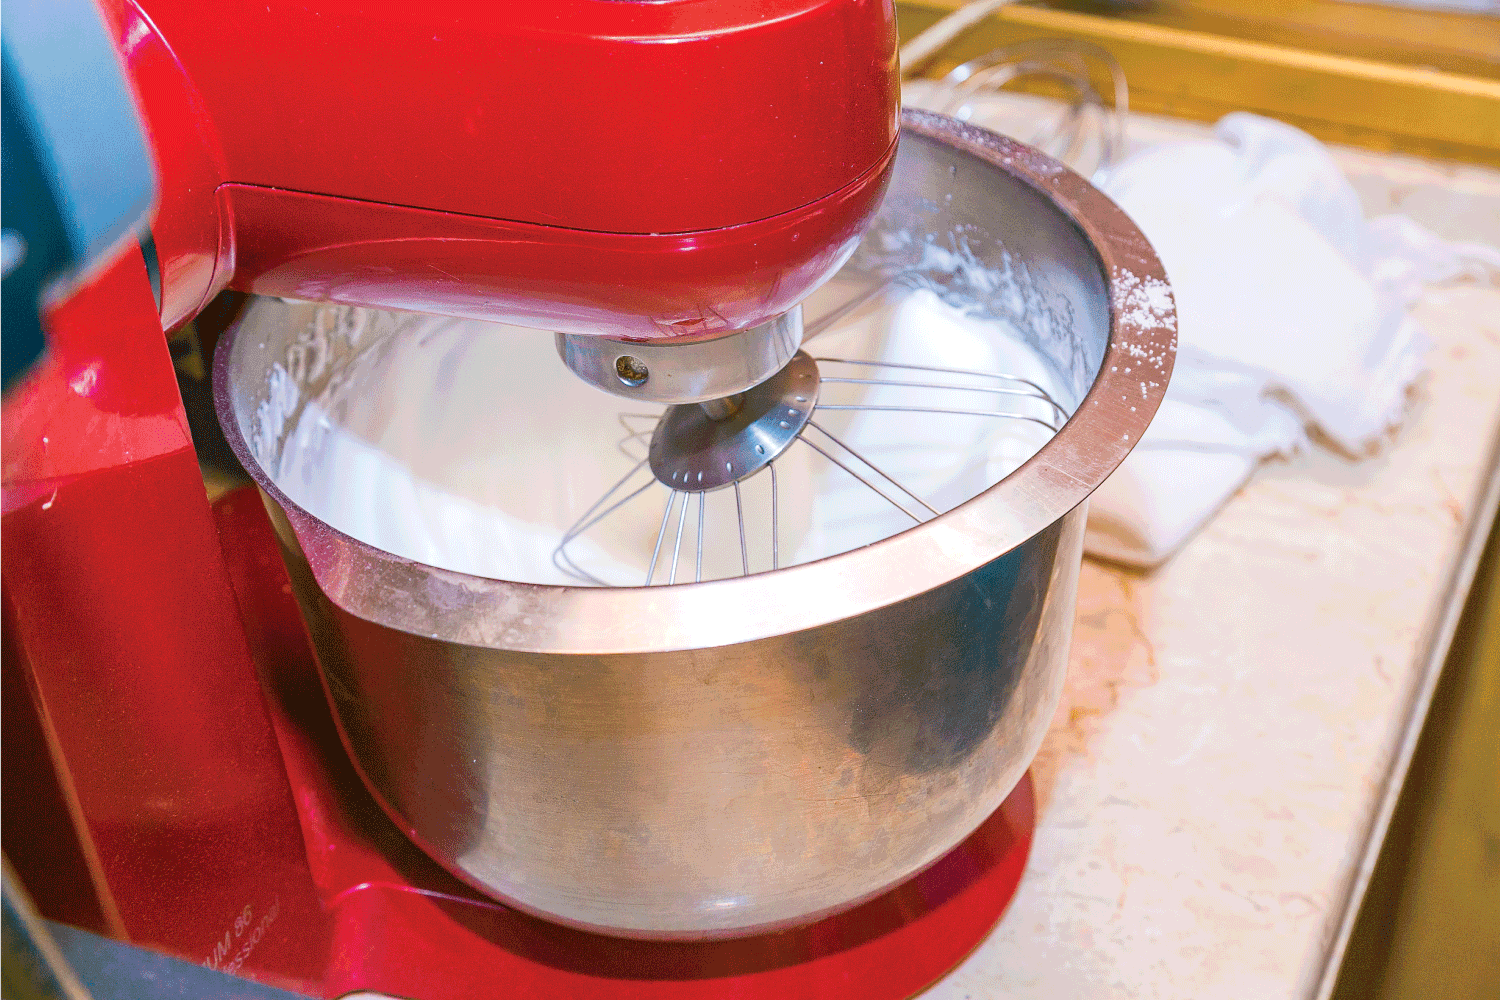 Electric mixer beats egg in the kitchen